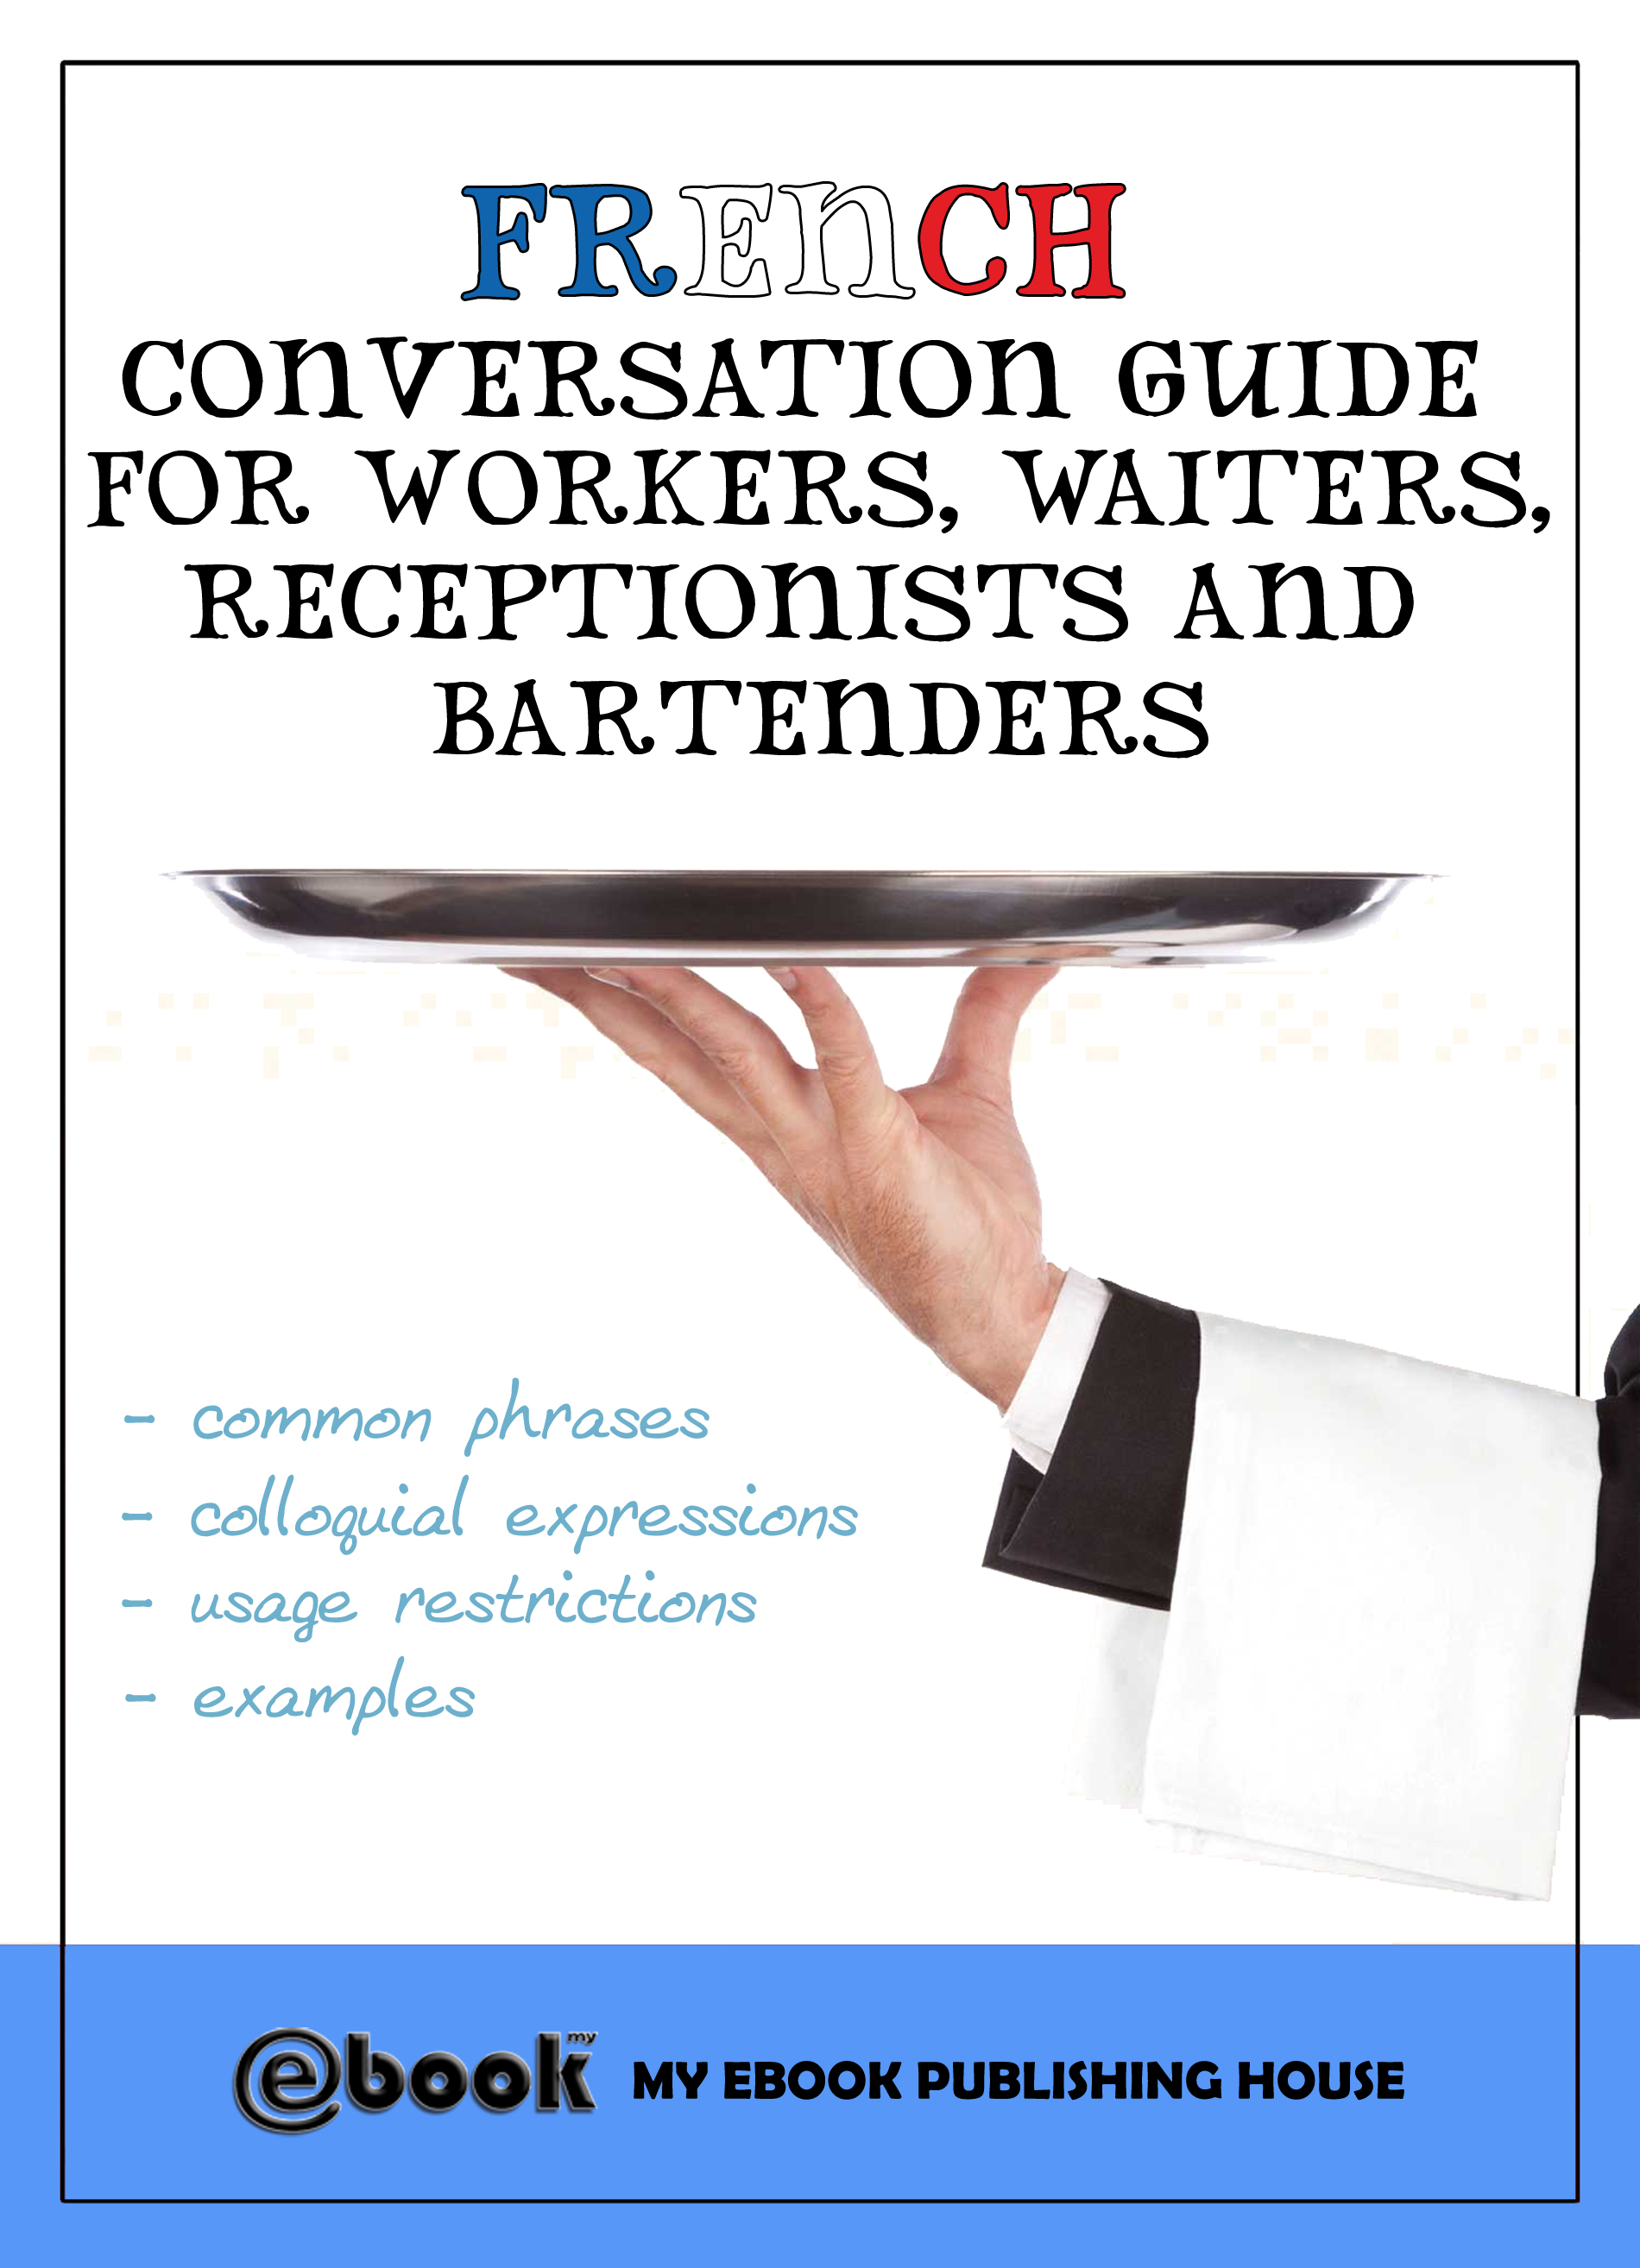 My e books. Guided conversation.